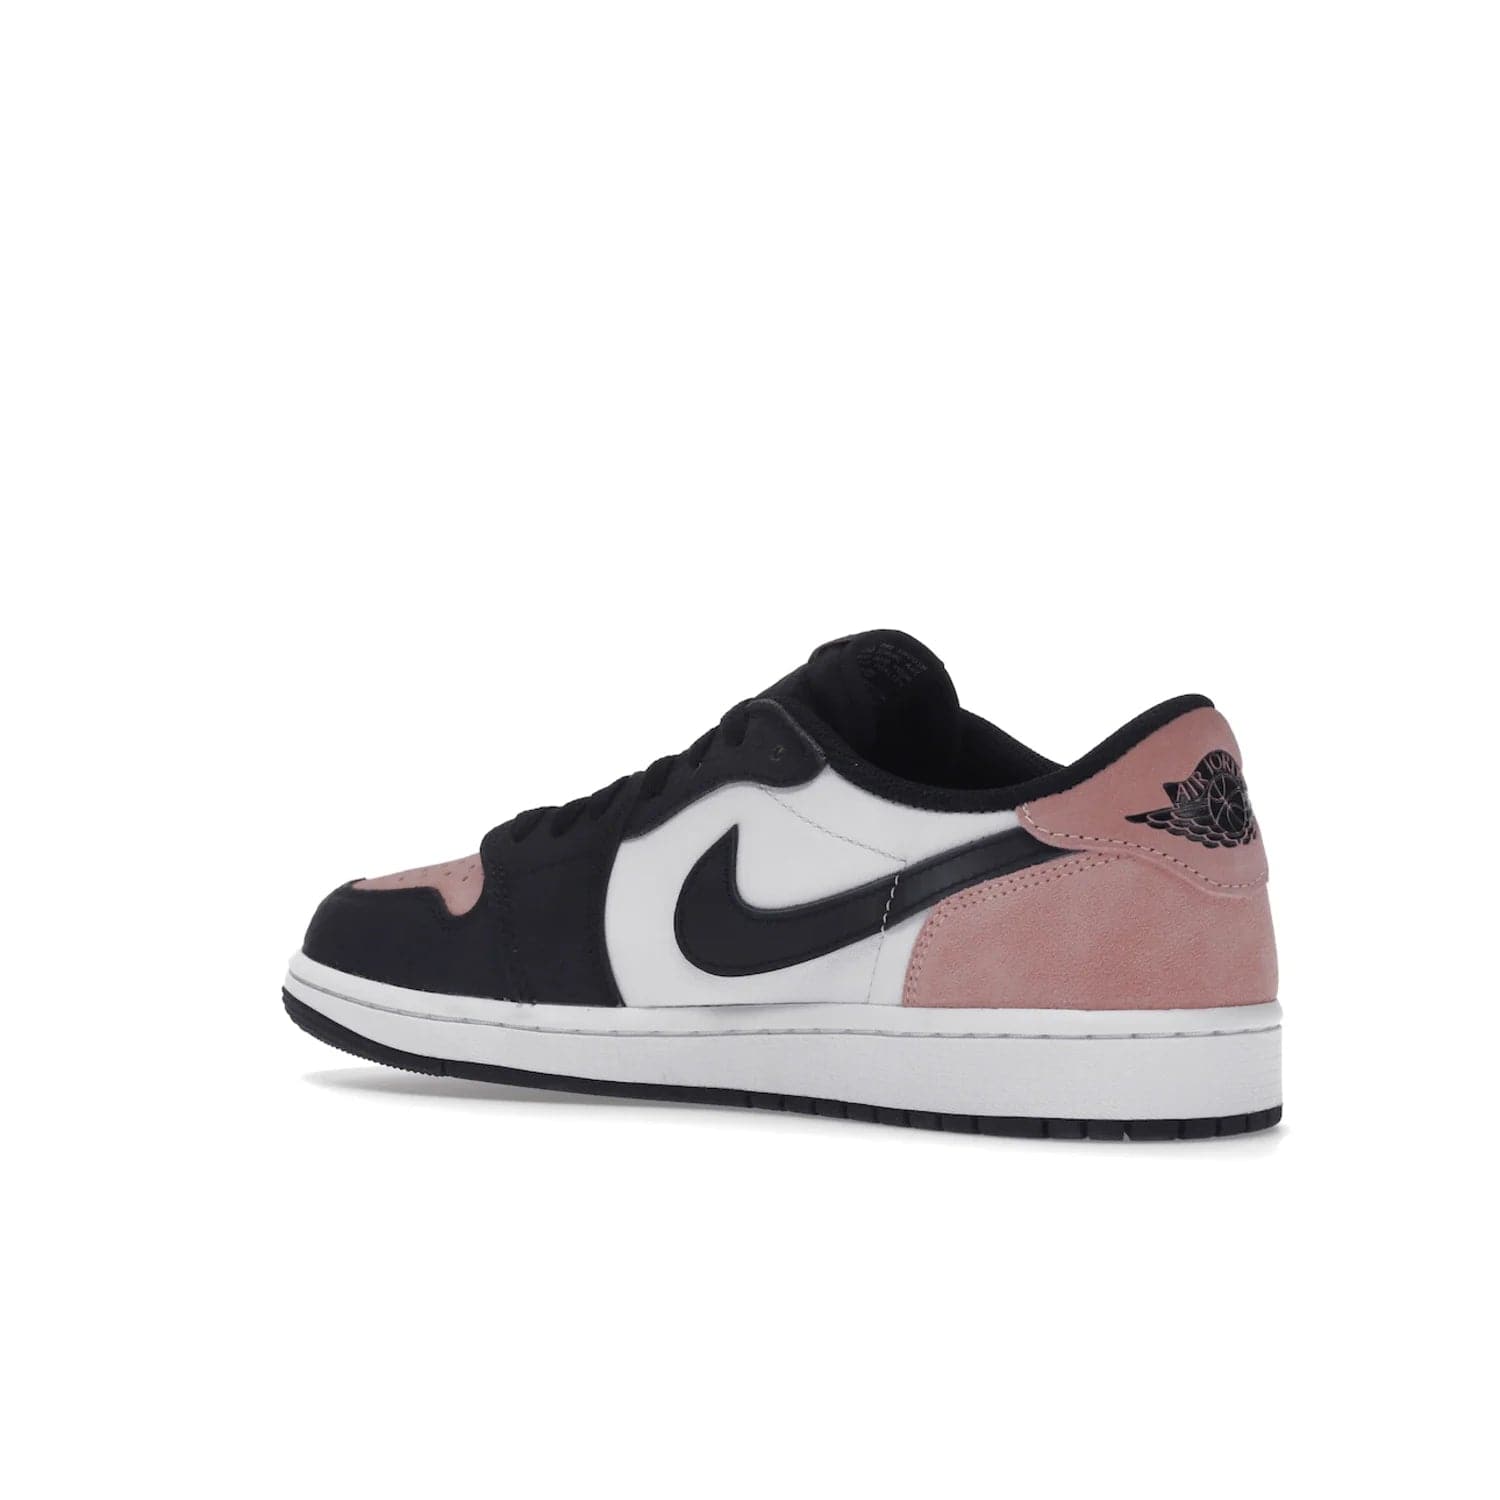 Jordan 1 Low OG Bleached Coral - Image 23 - Only at www.BallersClubKickz.com - Introducing the Air Jordan 1 Low OG Bleached Coral. Constructed with white leather, black cracked leather & Bleached Coral suede. Signature Jordan Wings logo, white Air sole. Get the pack in July 2022 and stand out.